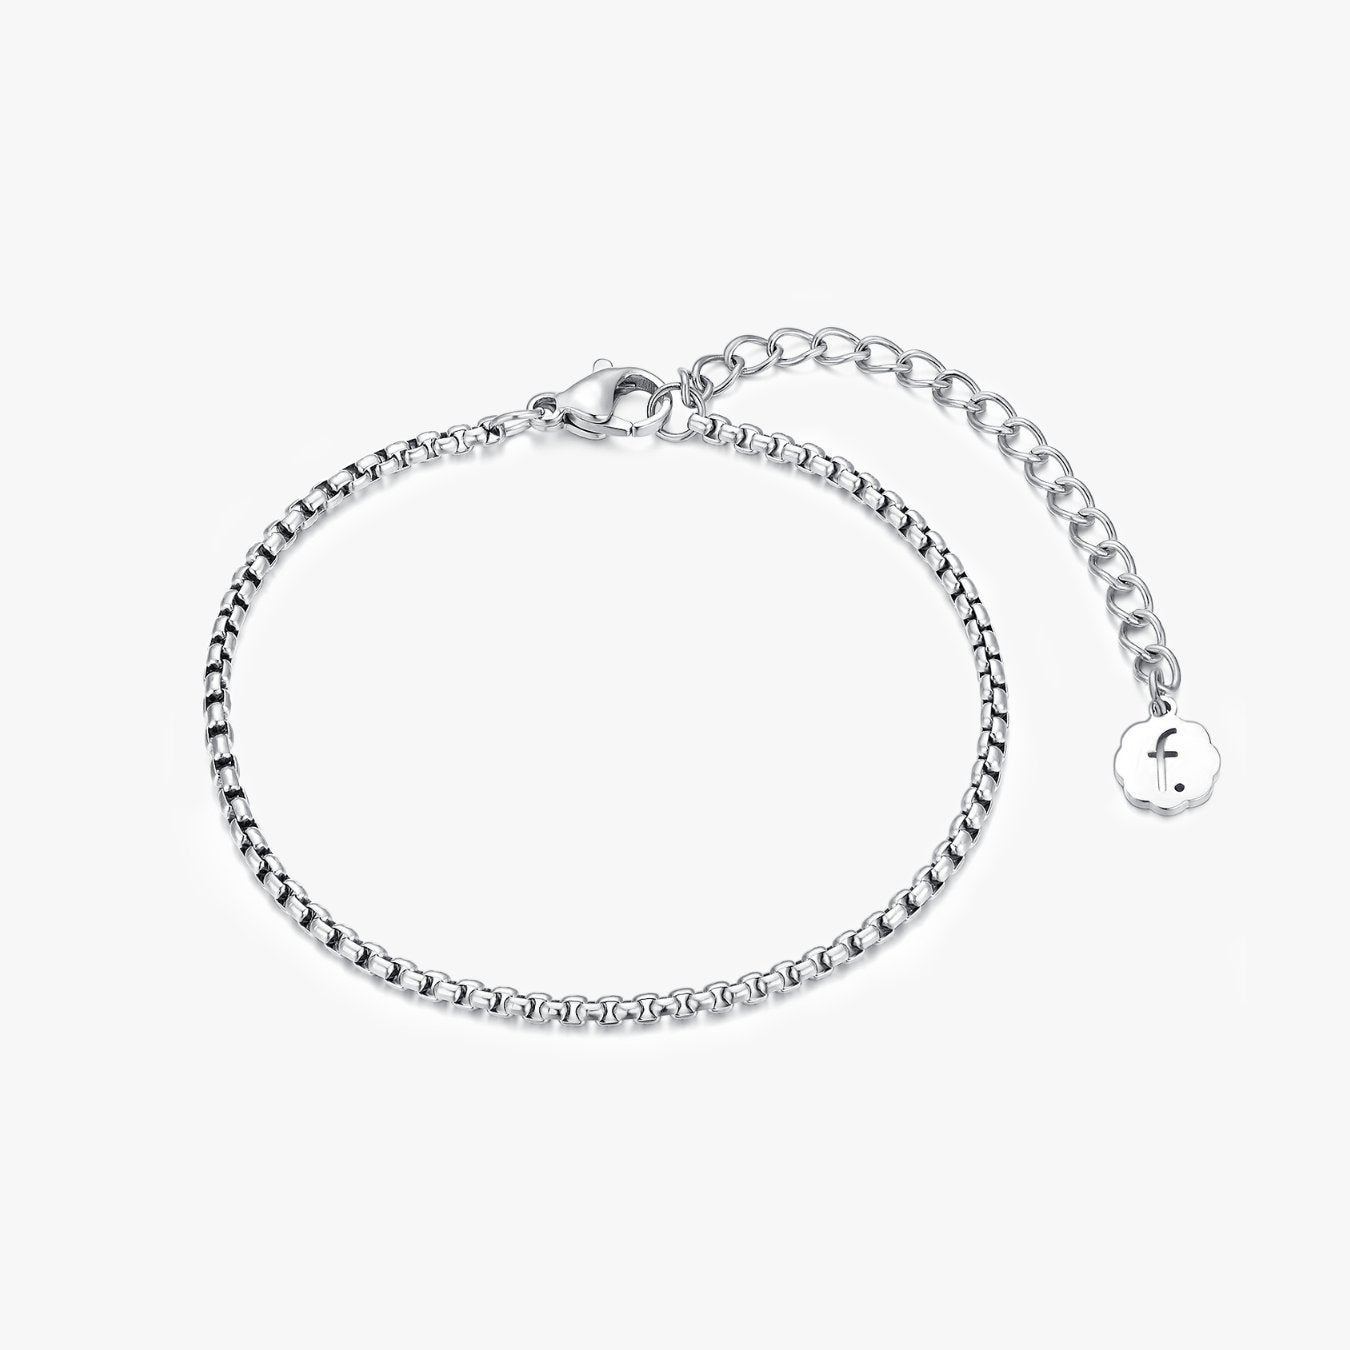 Round Box Chain Bracelet in Silver - Flaire & Co.